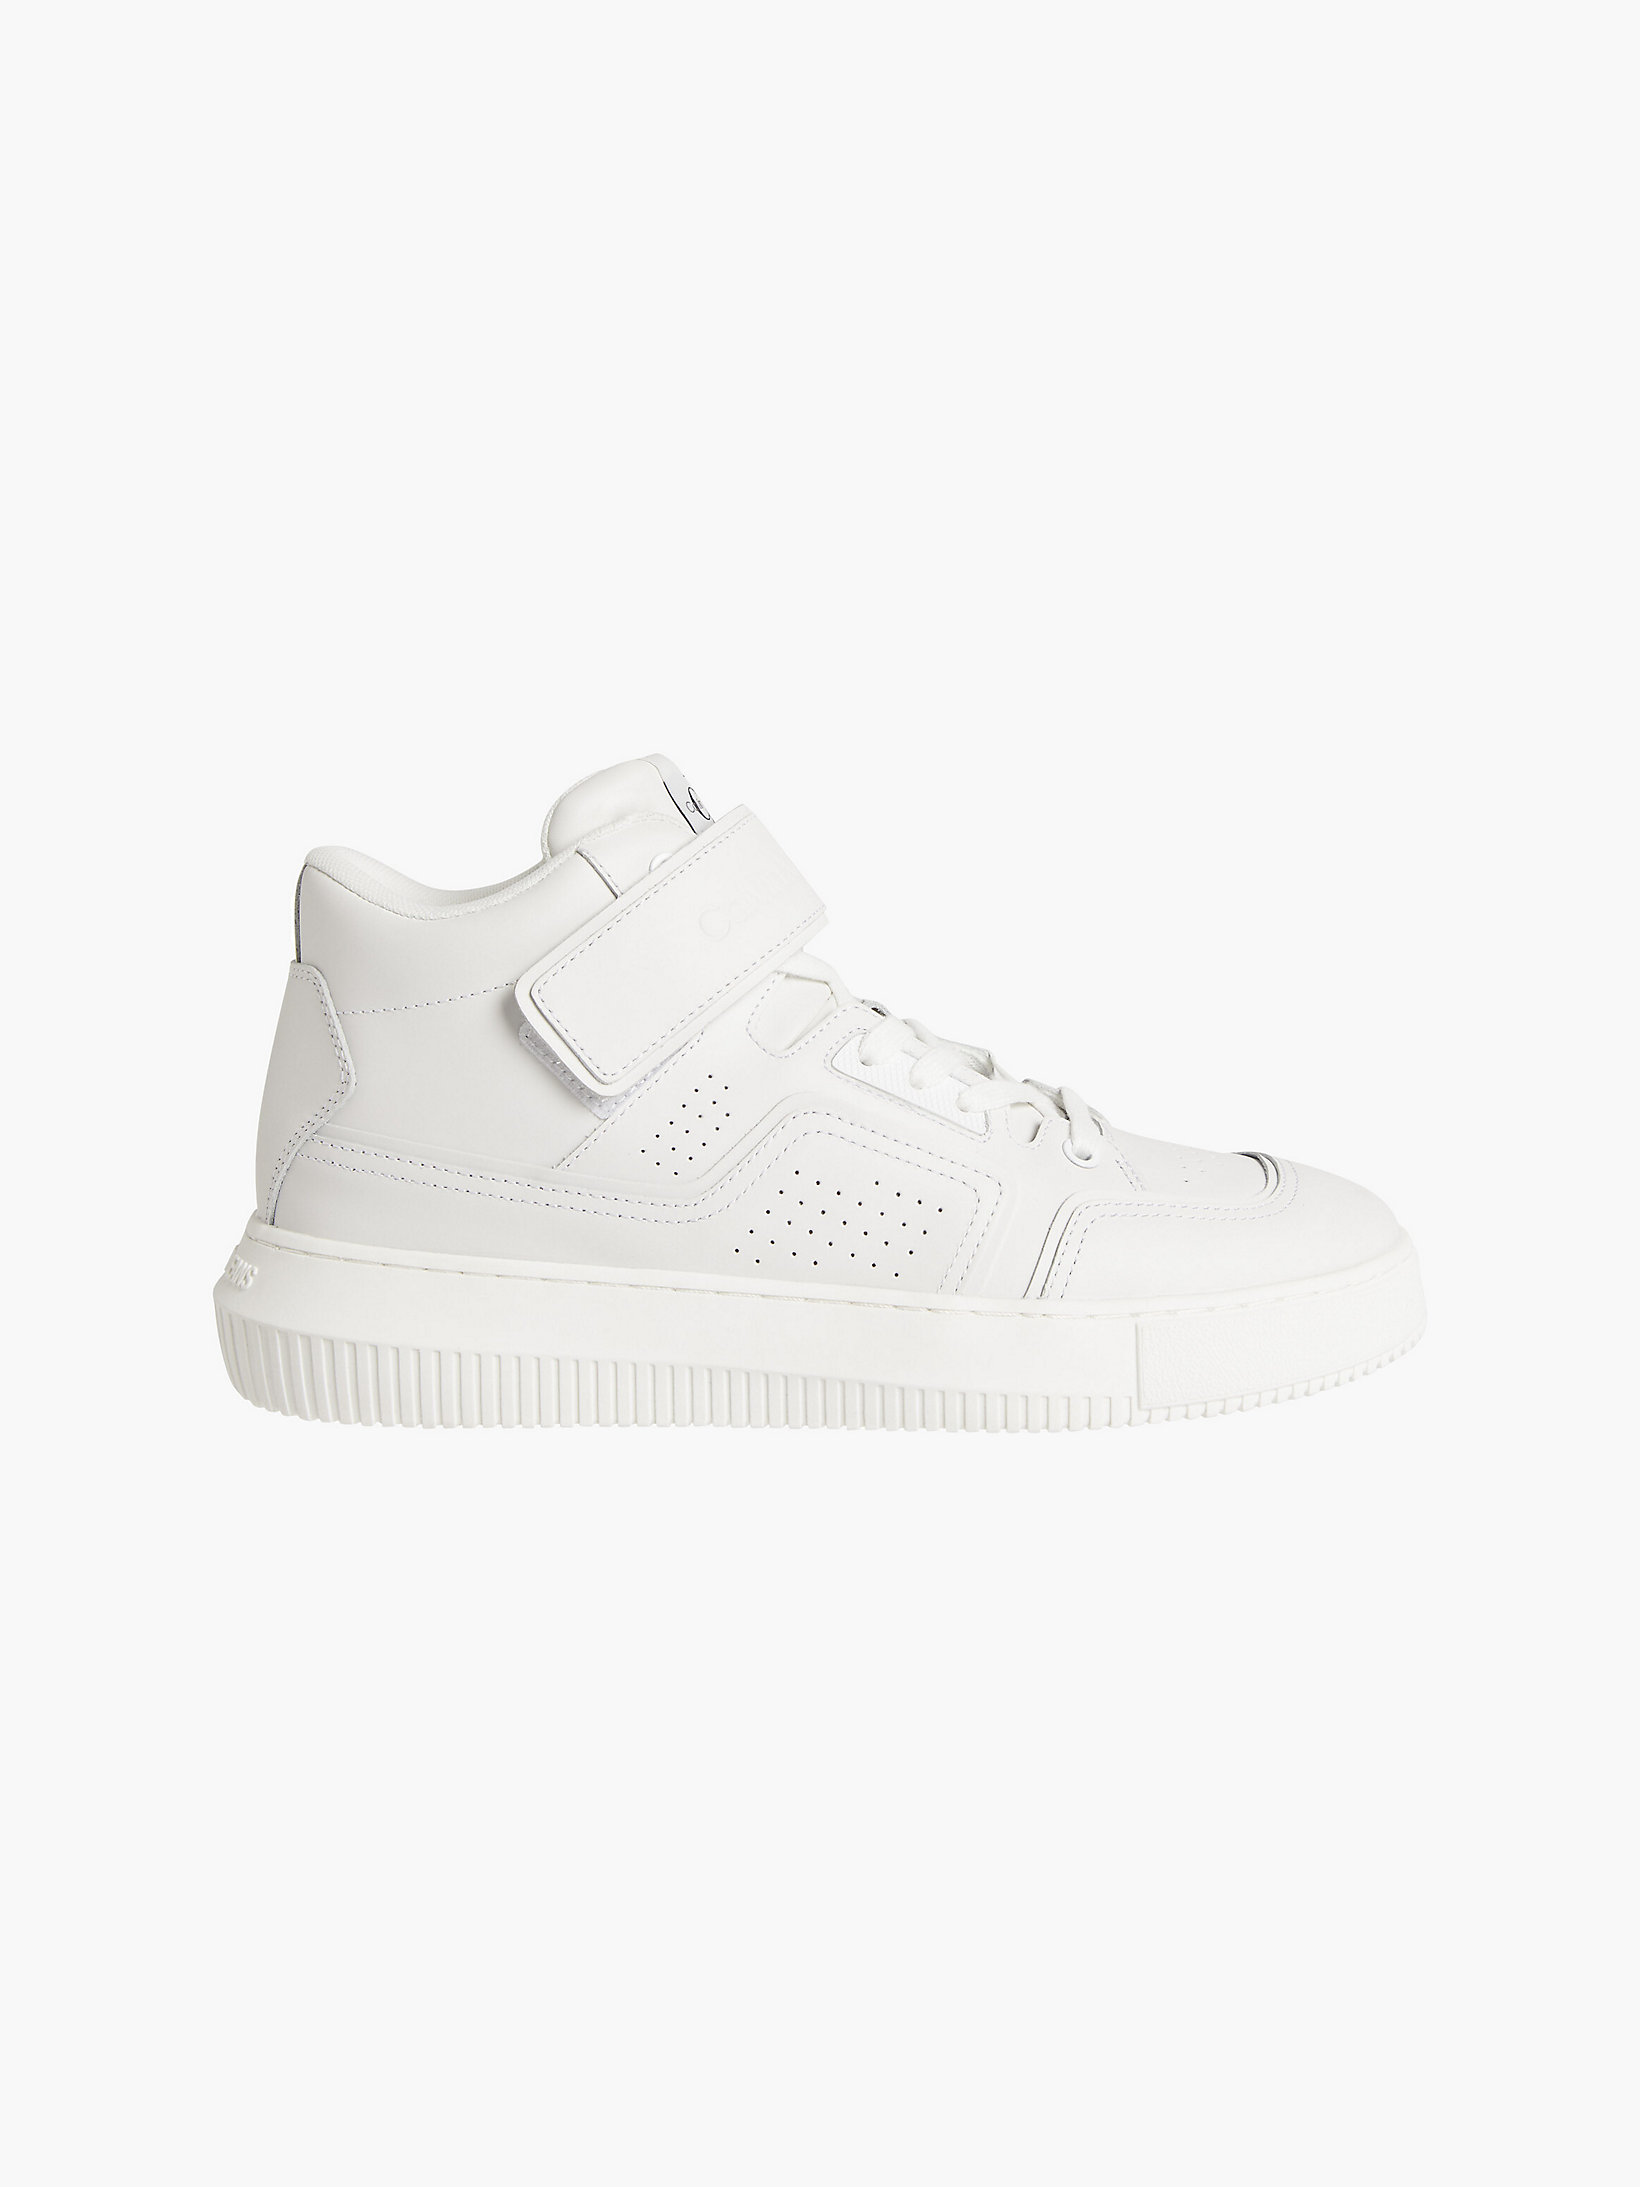 Triple White Leather High-Top Trainers undefined men Calvin Klein